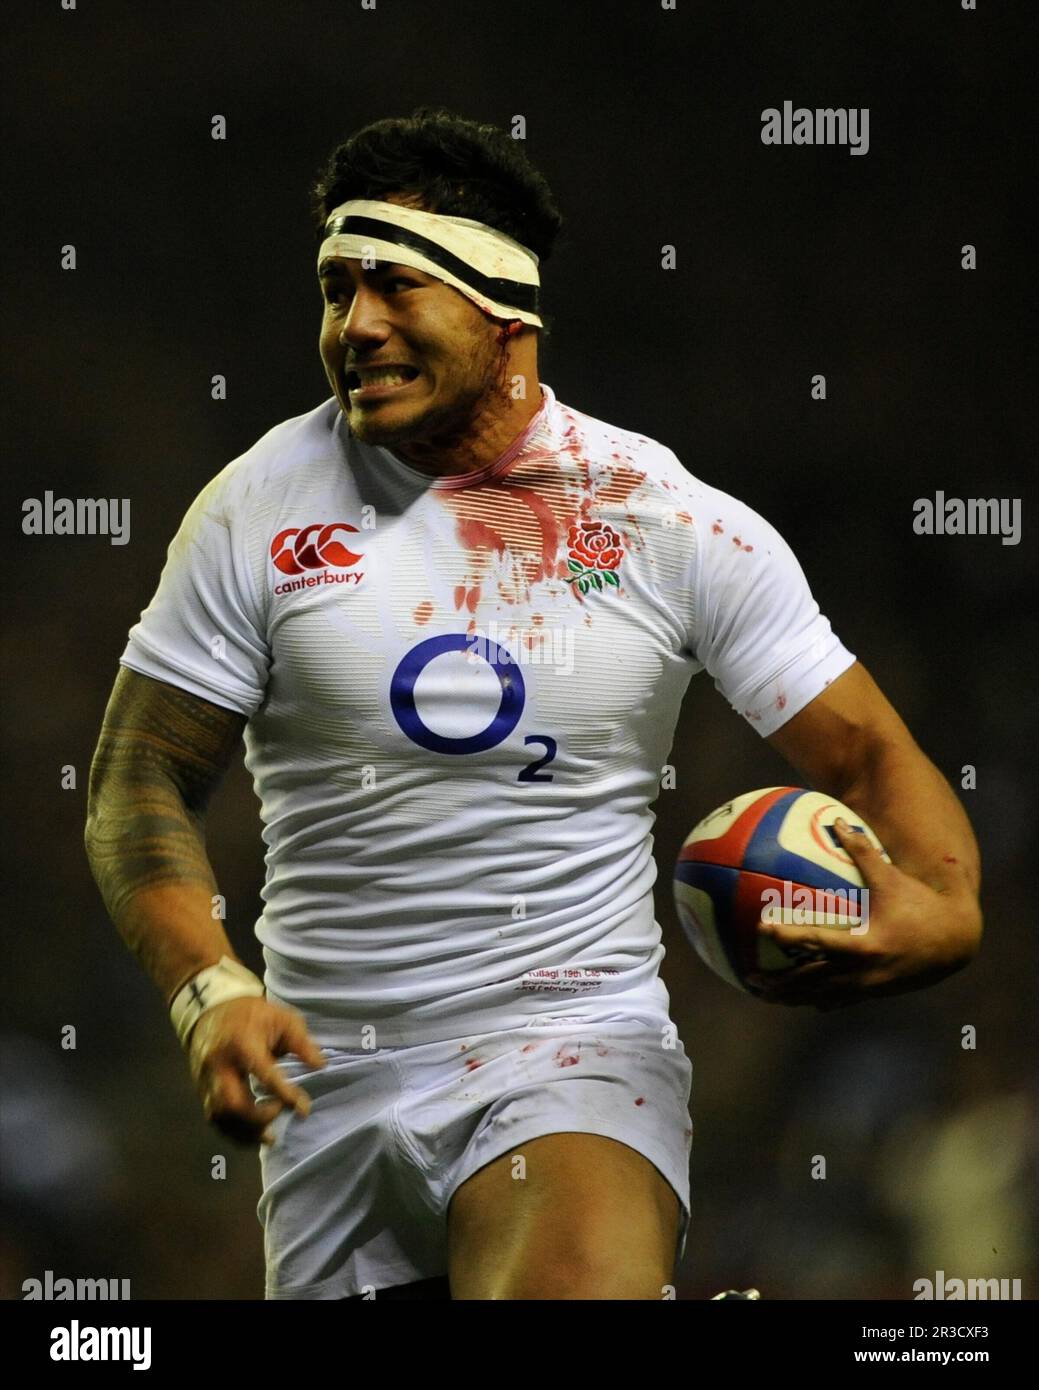 Manu Tuilagi of England runs in a try during the RBS 6 Nations match between England and France at Twickenham on Saturday 23rd February 2013 (Photo by Stock Photo